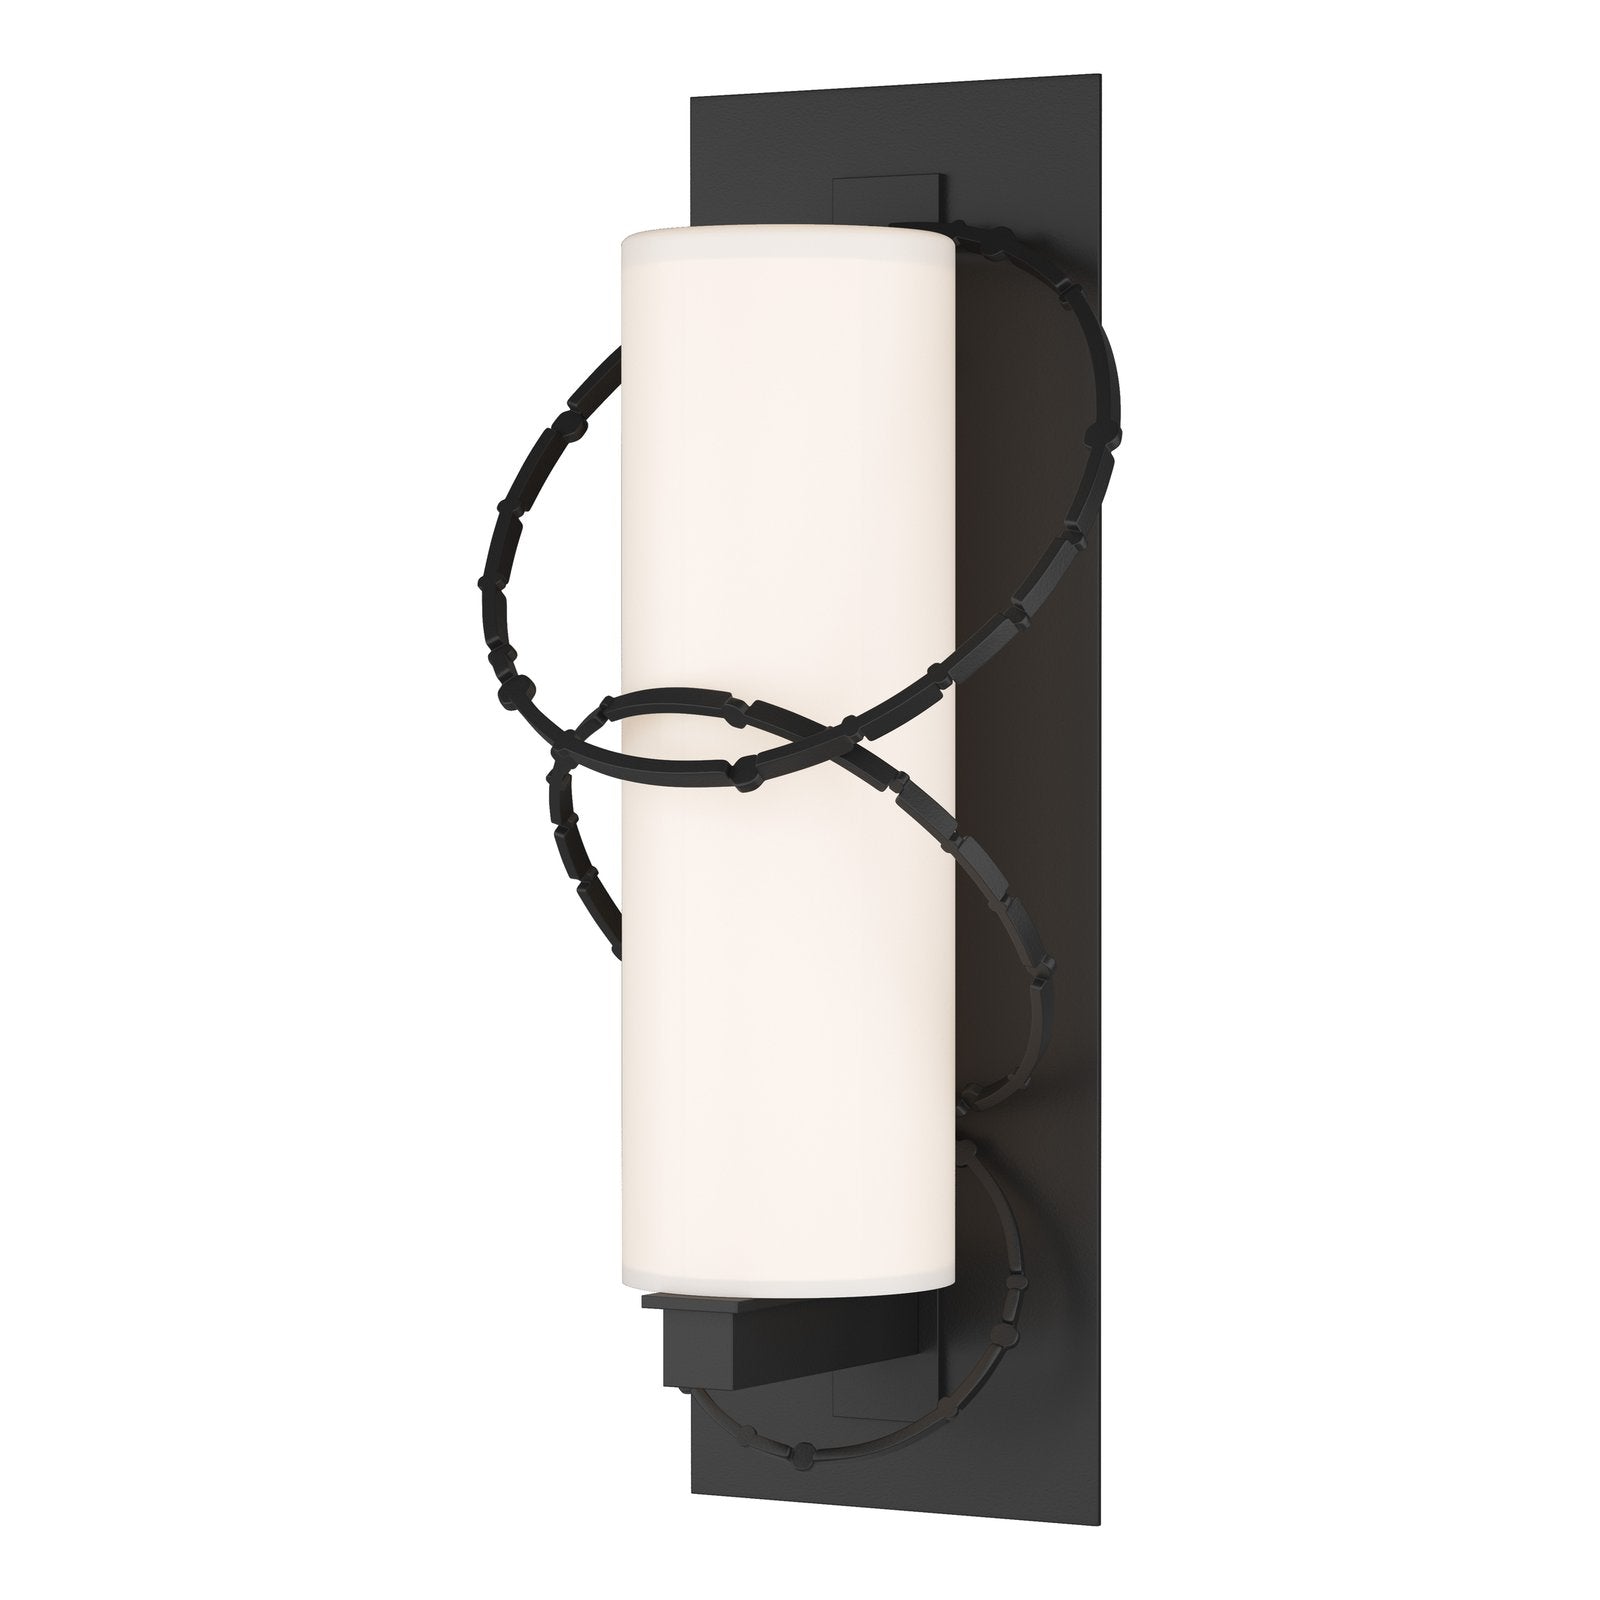 Hubbardton Forge Olympus Large Outdoor Sconce Outdoor l Wall Hubbardton Forge Coastal Black  